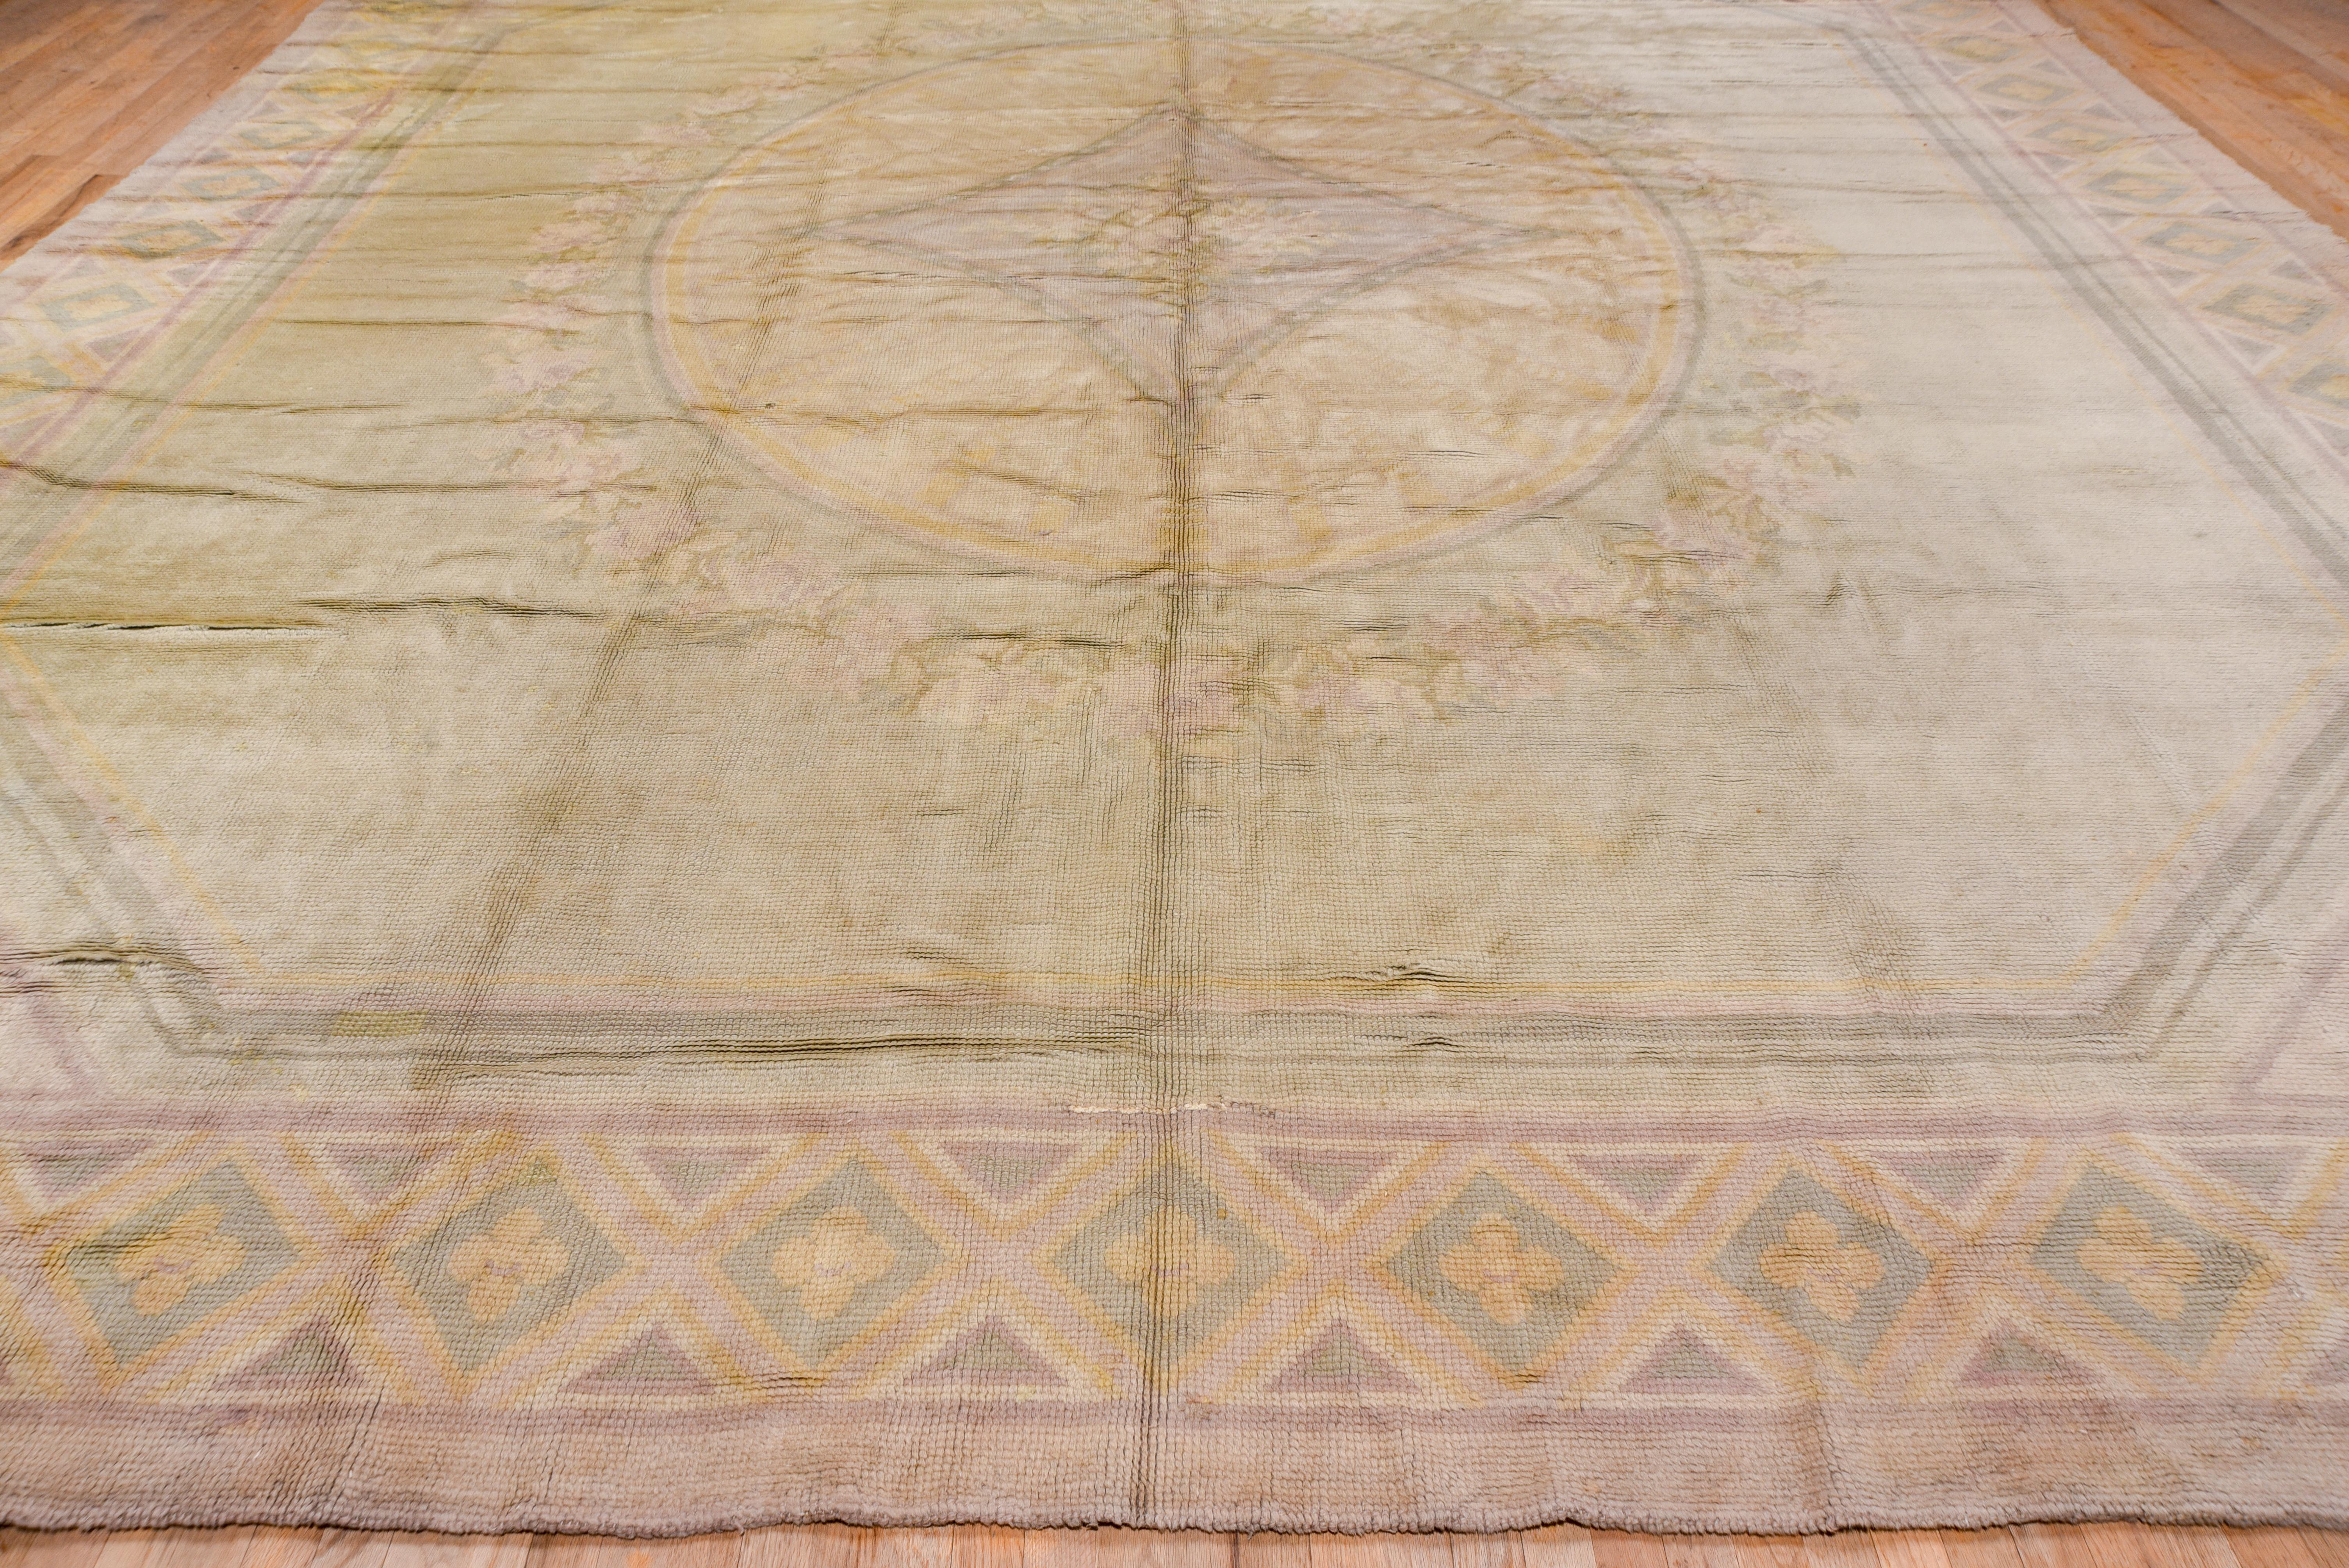 Early 20th Century French Savonnerie Carpet, Square, Soft Tones, circa 1920s